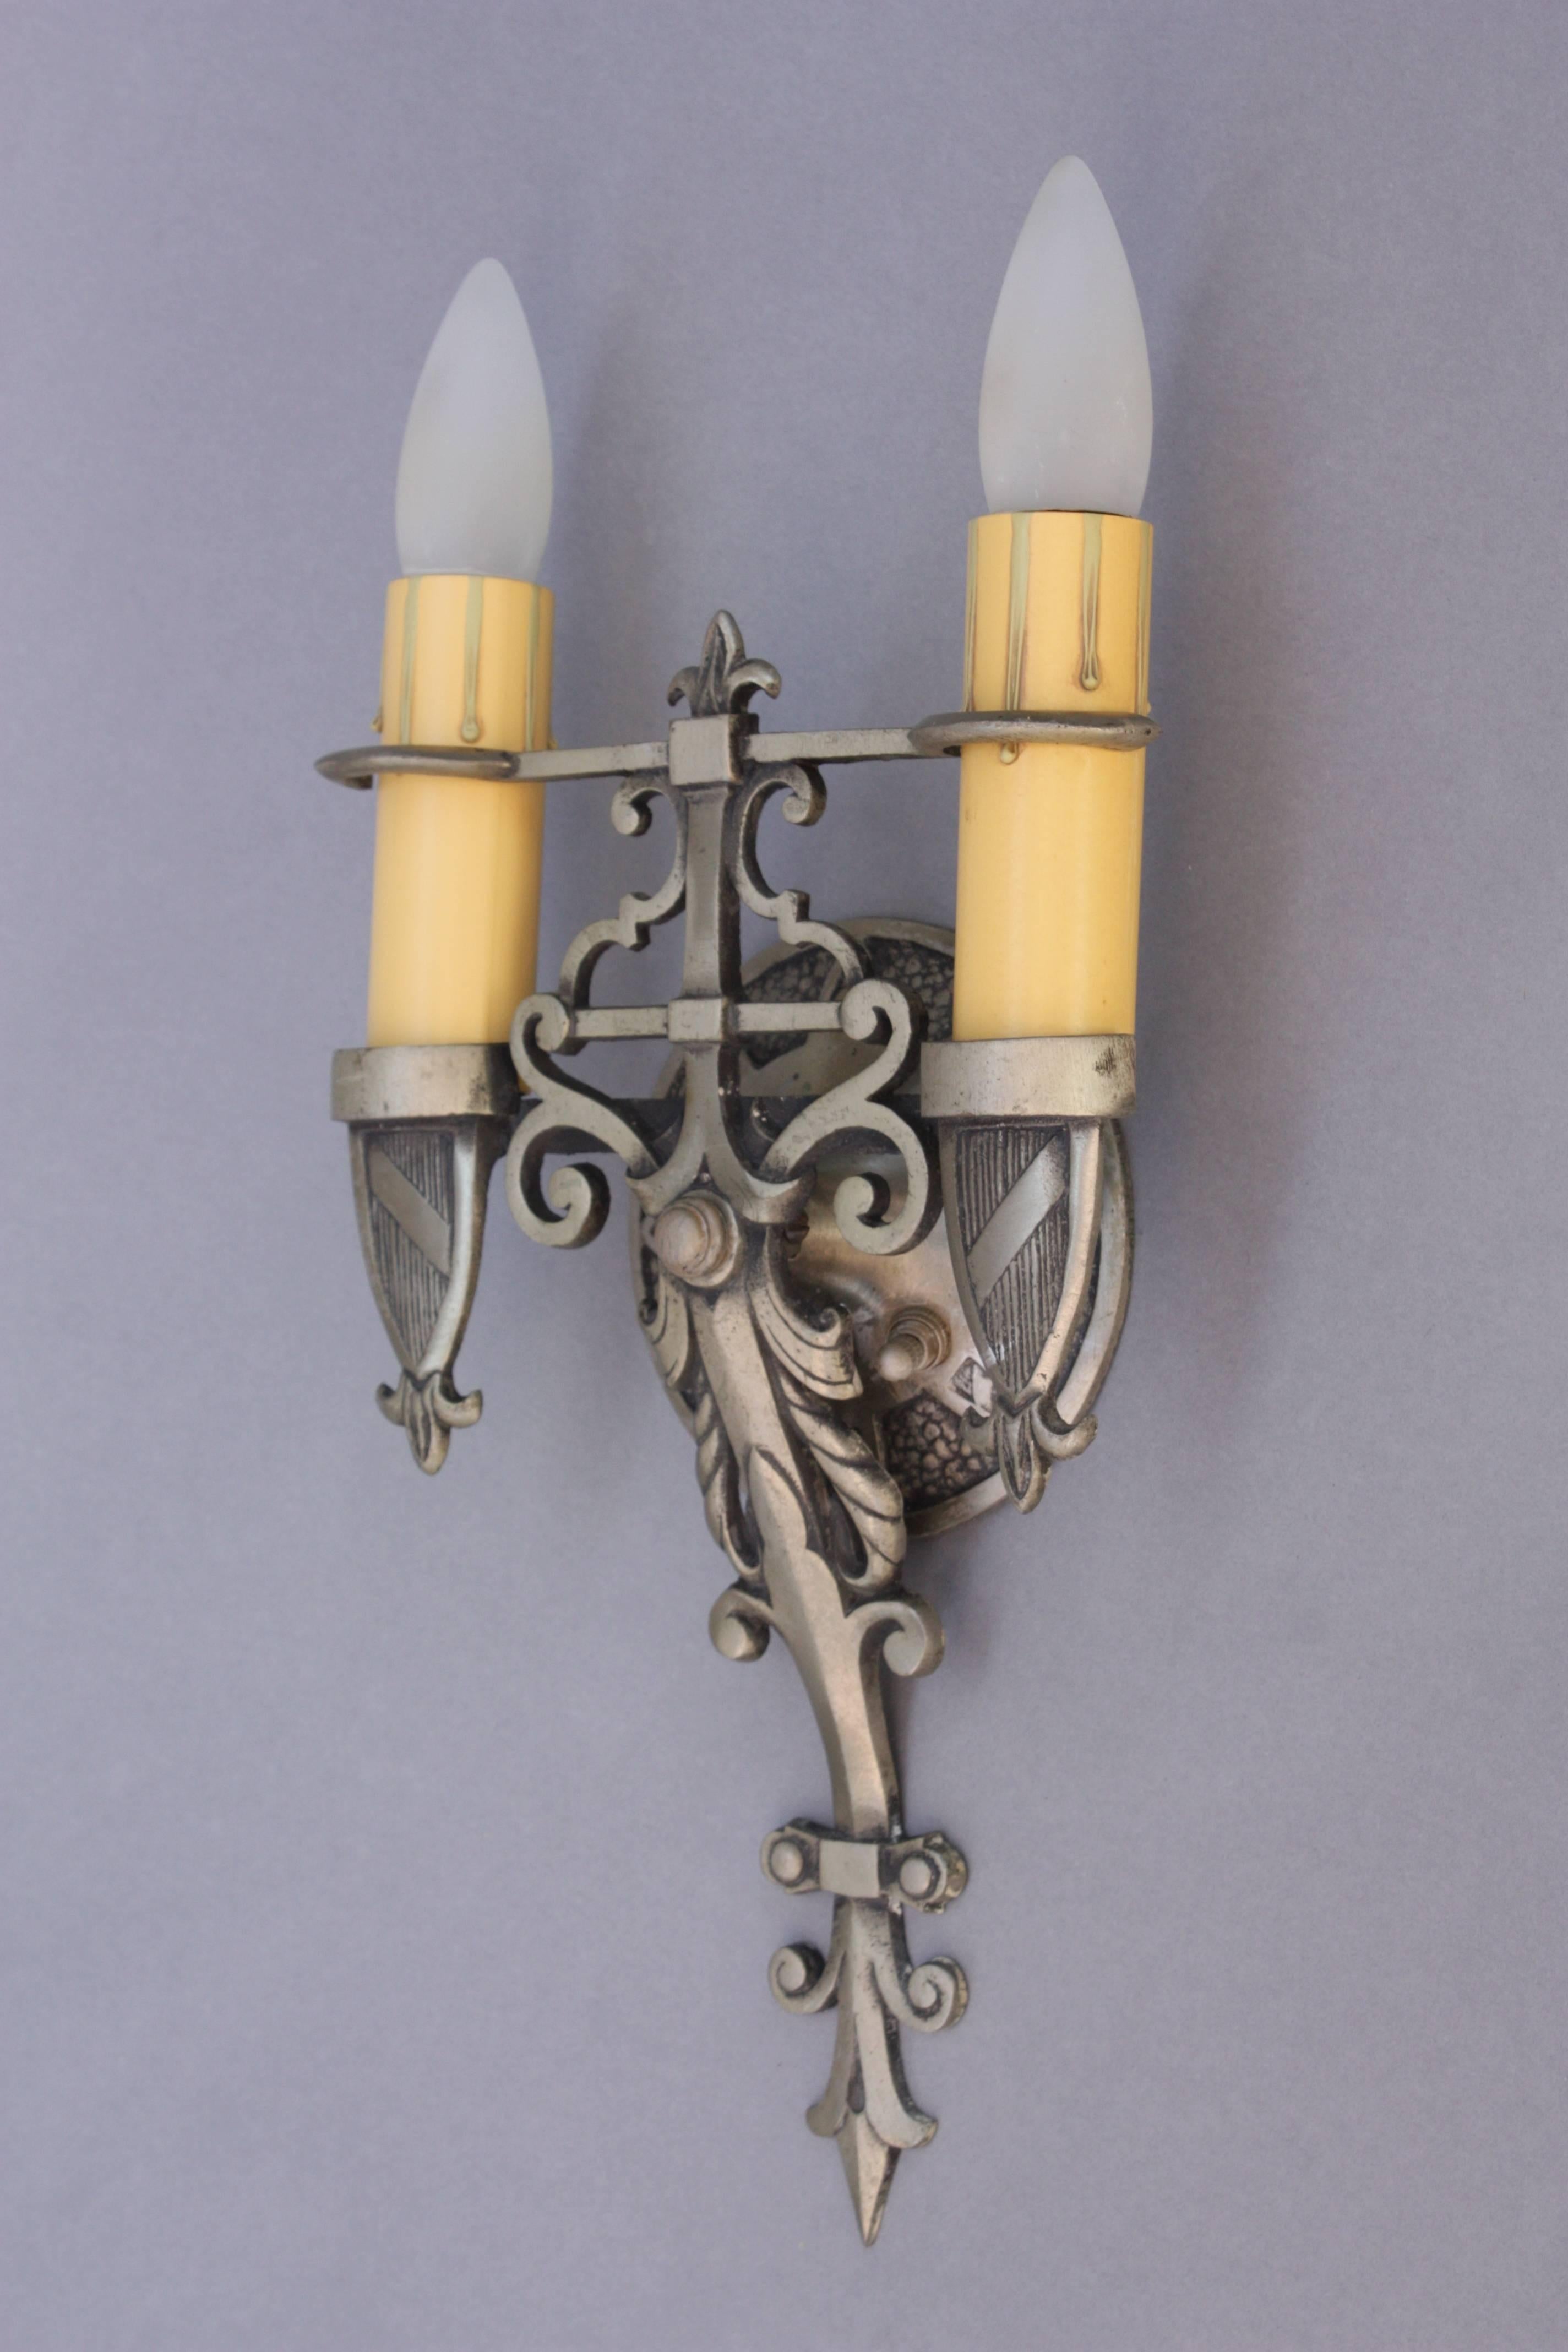 Ornately cast 1920s sconces with shield motif and pewter colored finish. Price is for the pair.